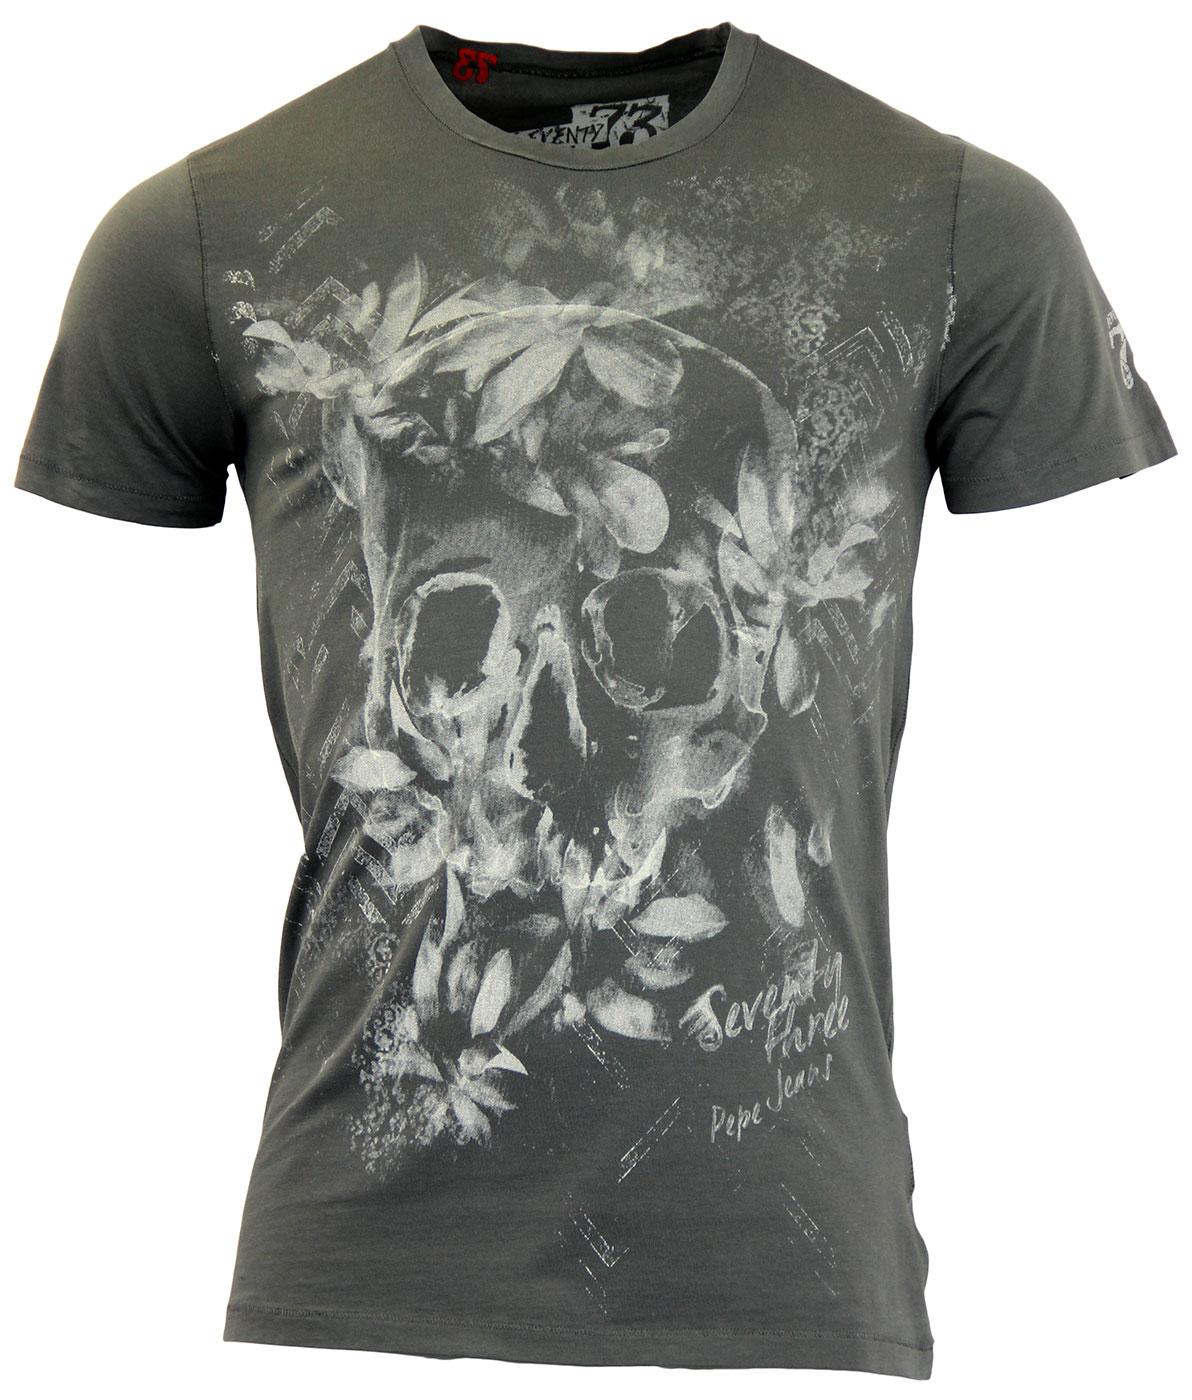 Gloucester PEPE JEANS Indie Painted Skull T-Shirt